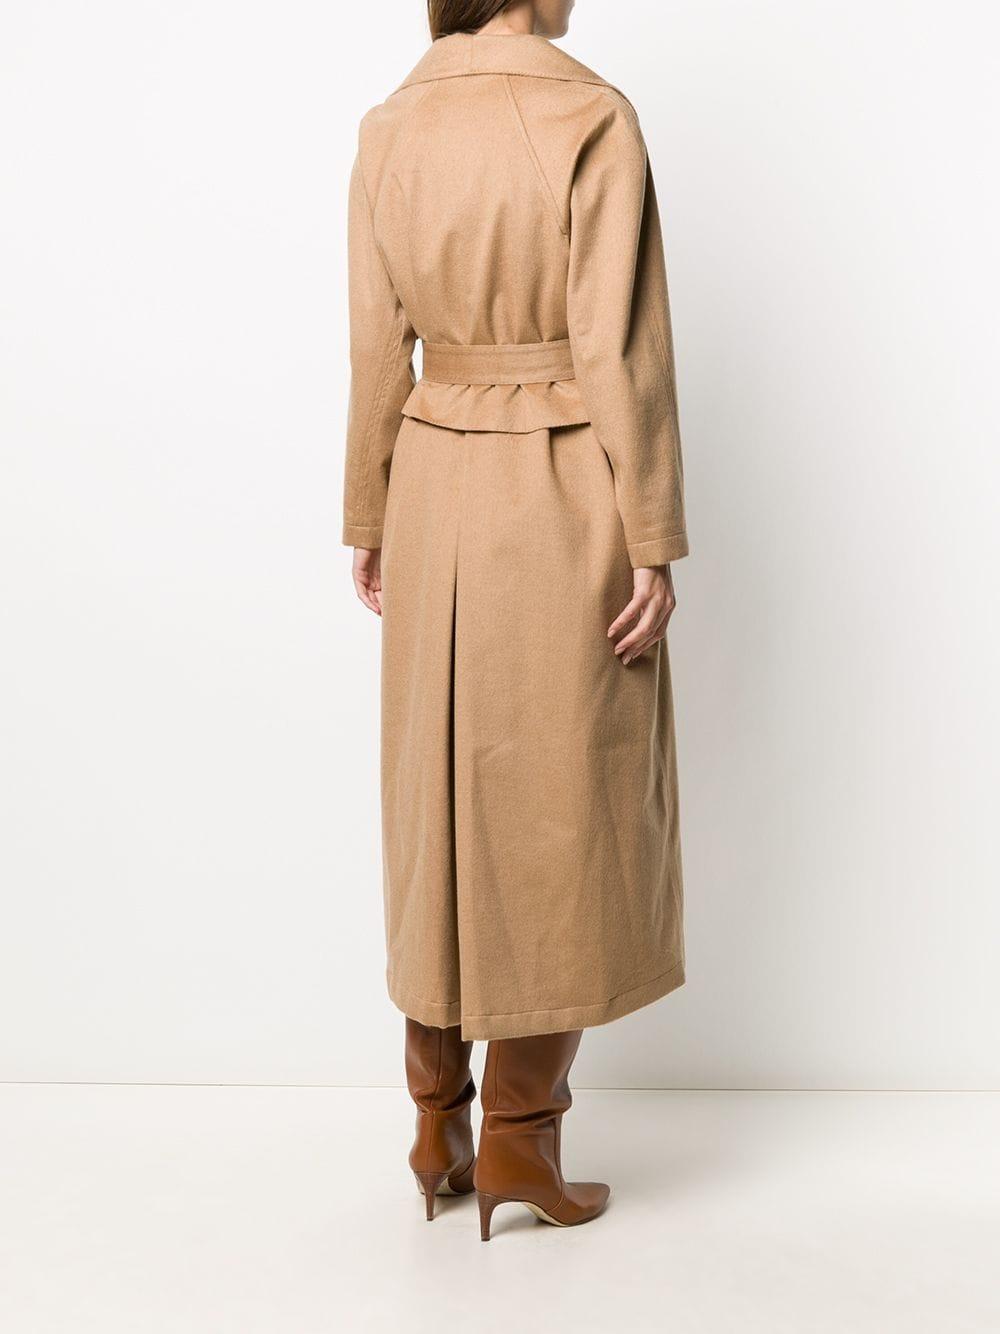 Agnona Camel Hair Trench Coat in Natural - Lyst